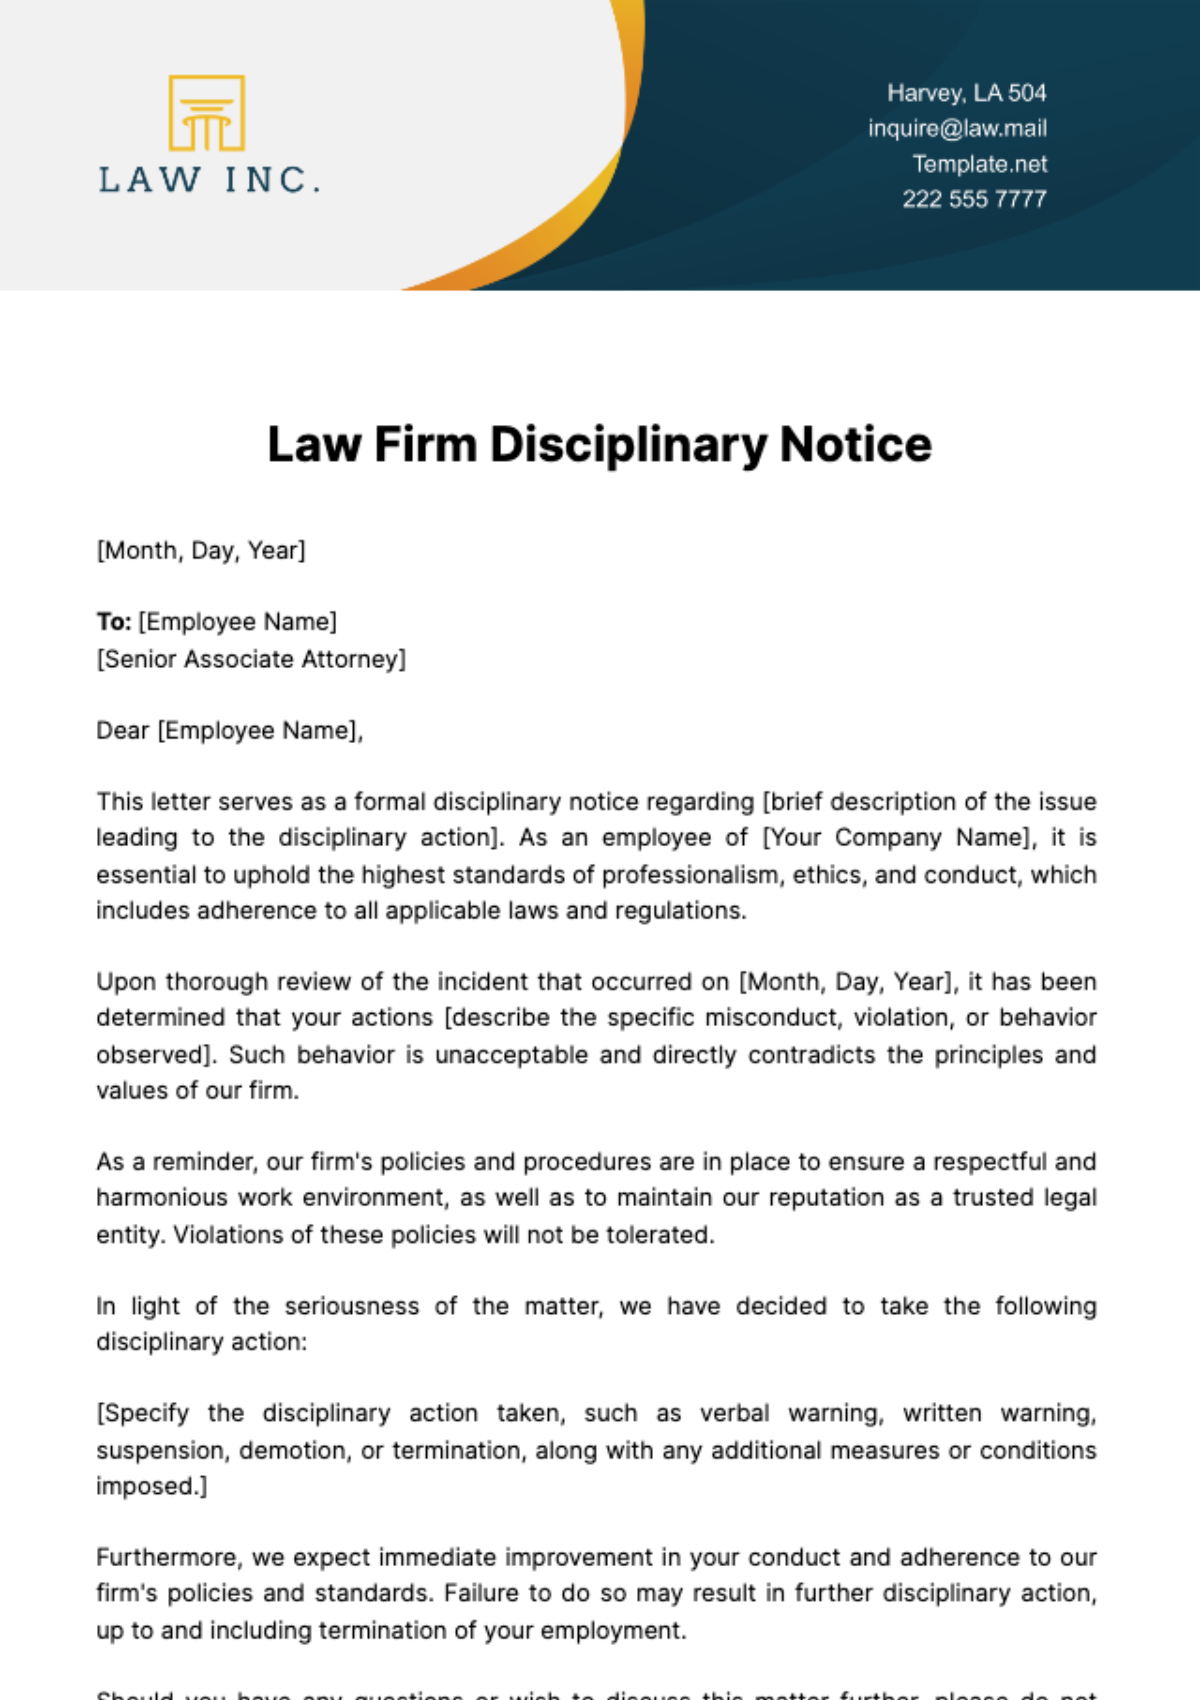 Law Firm Disciplinary Notice Template